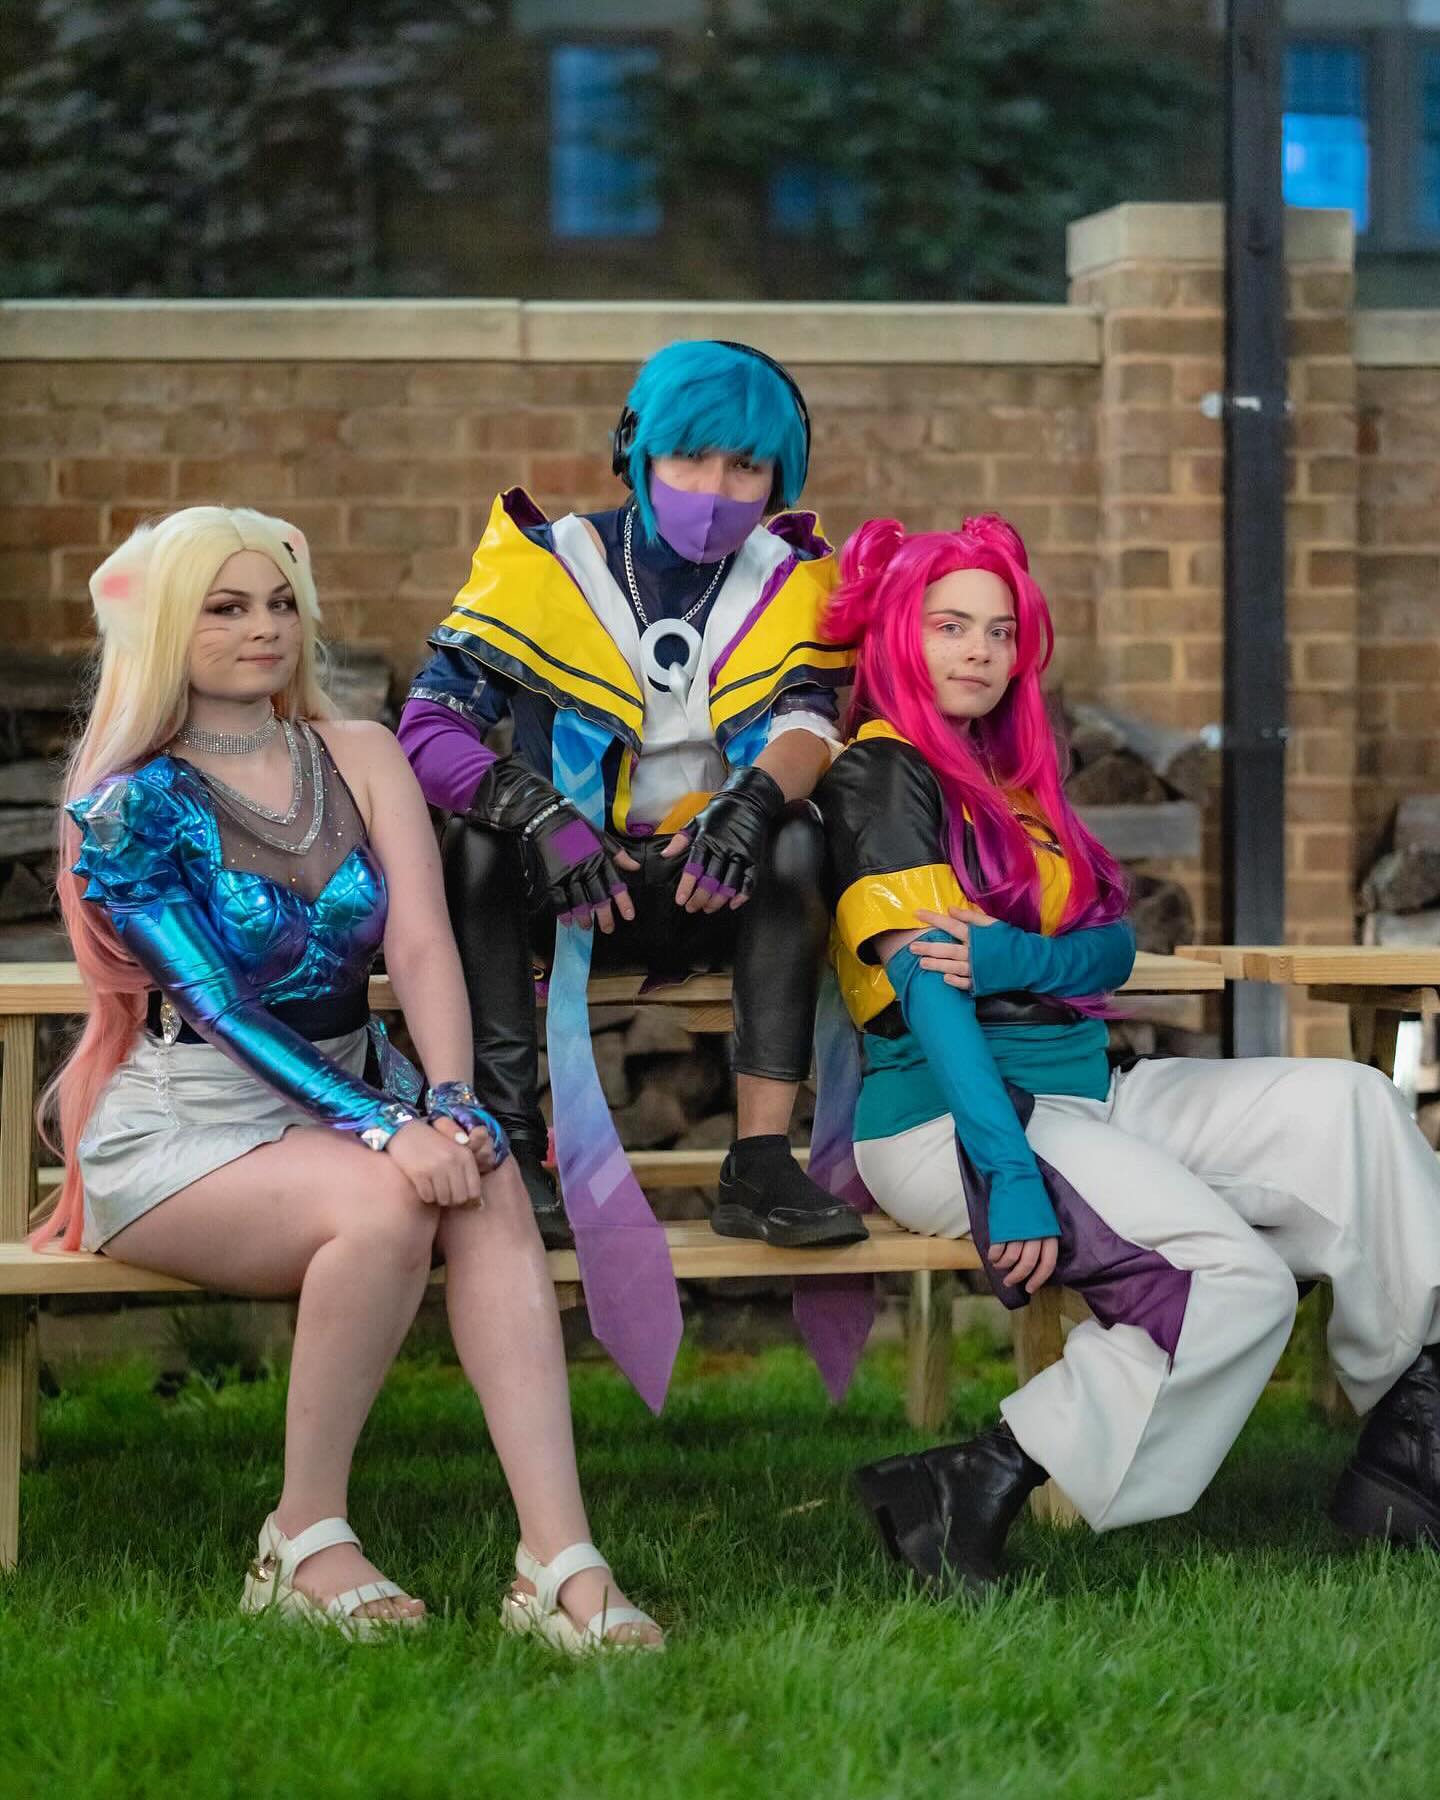 “And even rockstars got feelings that they feel”- Aphelios 

So happy I finally got to cosplay a League of legends character with these two. Heartsteel is my favorite Era of League so far and I can’t wait to cosplay more League in the future ❤️ 
•
Photo cred: @ryuuzamedia 

#leagueoflegends #cosplay #heartsteelcosplay #riotgames #cosplayerofinstagram #gaycosplay #videogamecosplay #aphelios